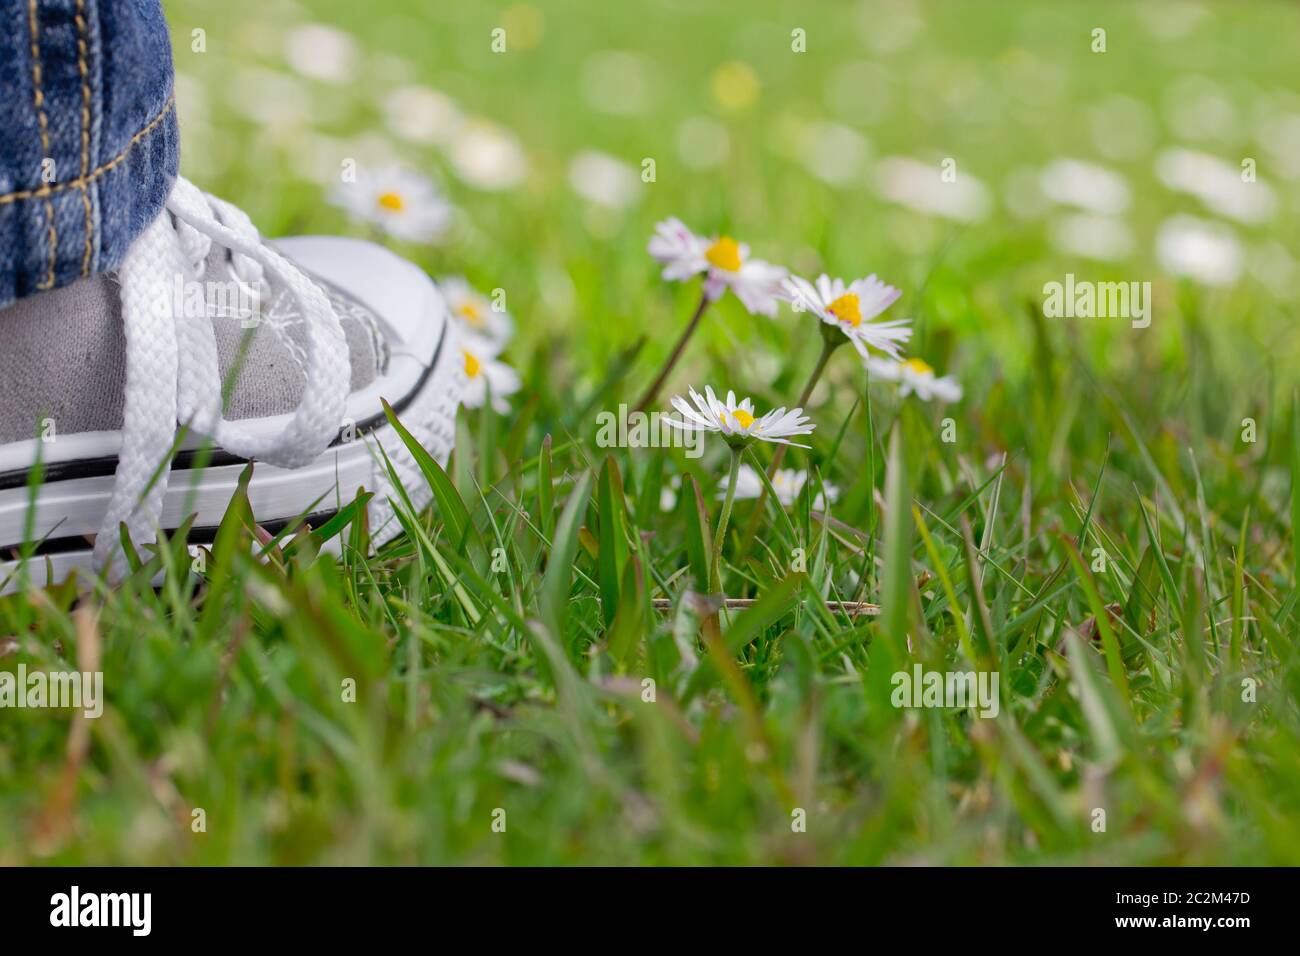 Child boy or girl feet in jeans and sneakers standing on green grass of lawn with daisies spring concept Stock Photo